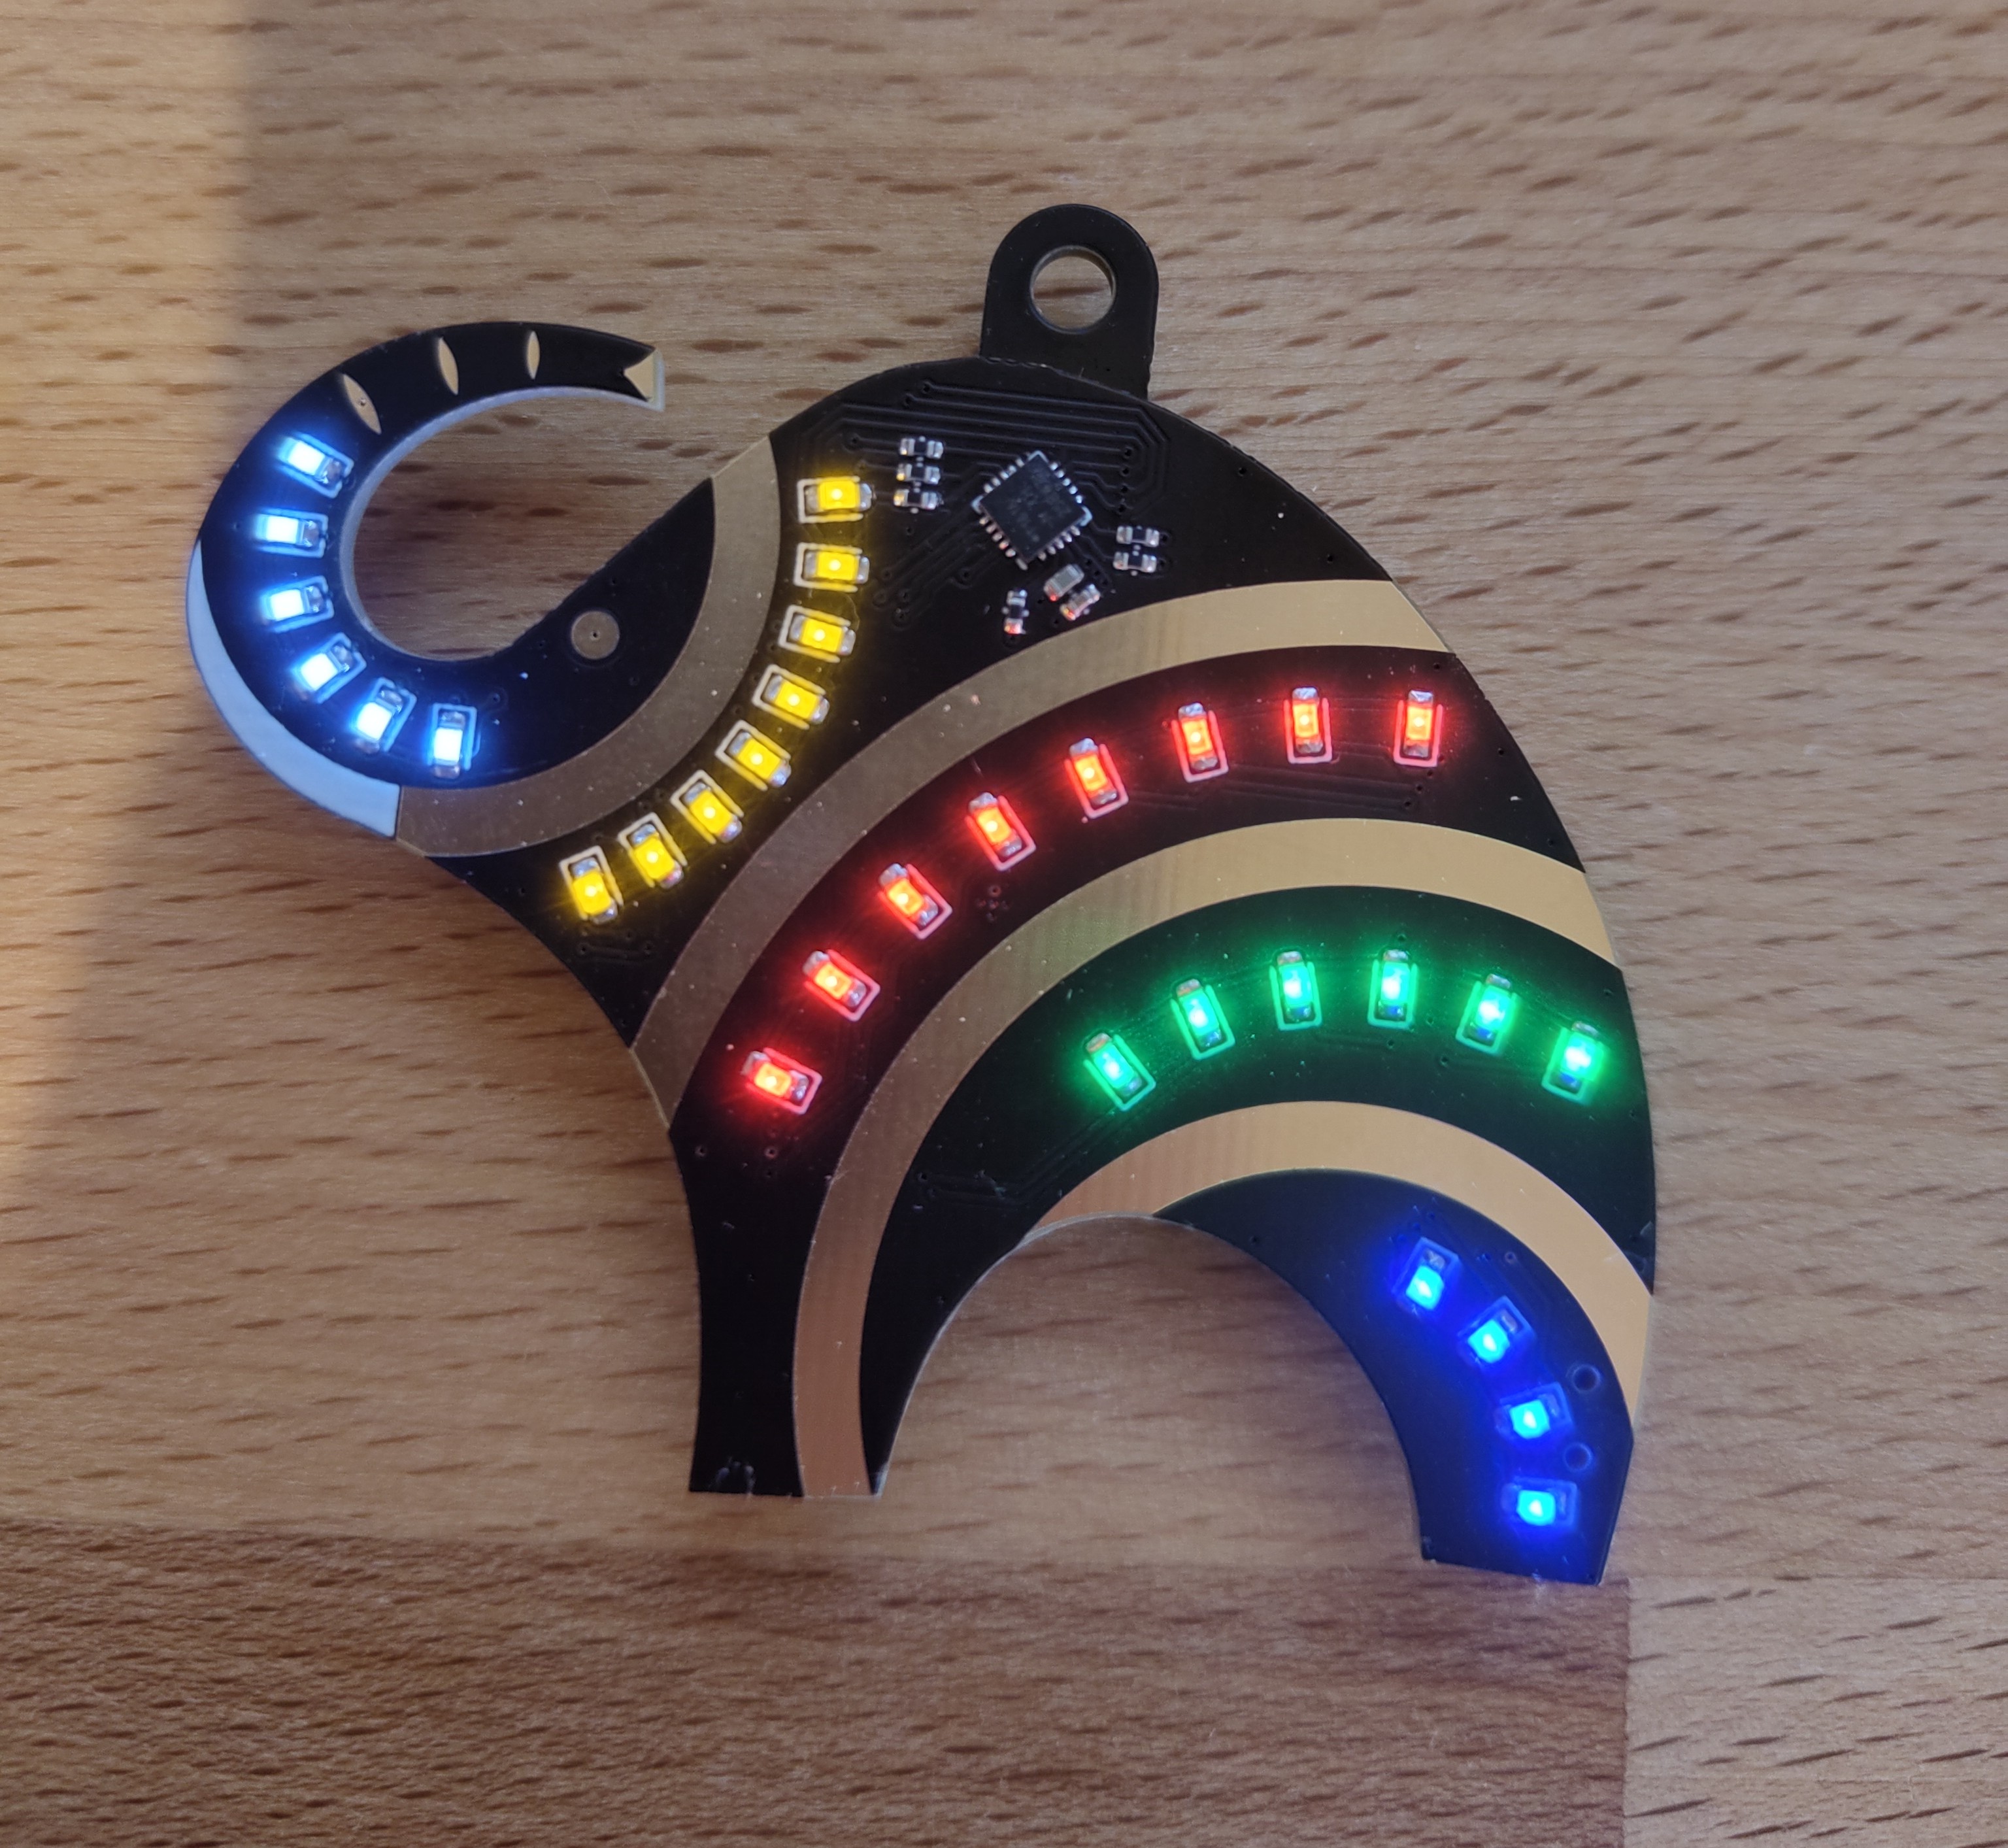 A black PCB with LEDS in the shape of a elephant